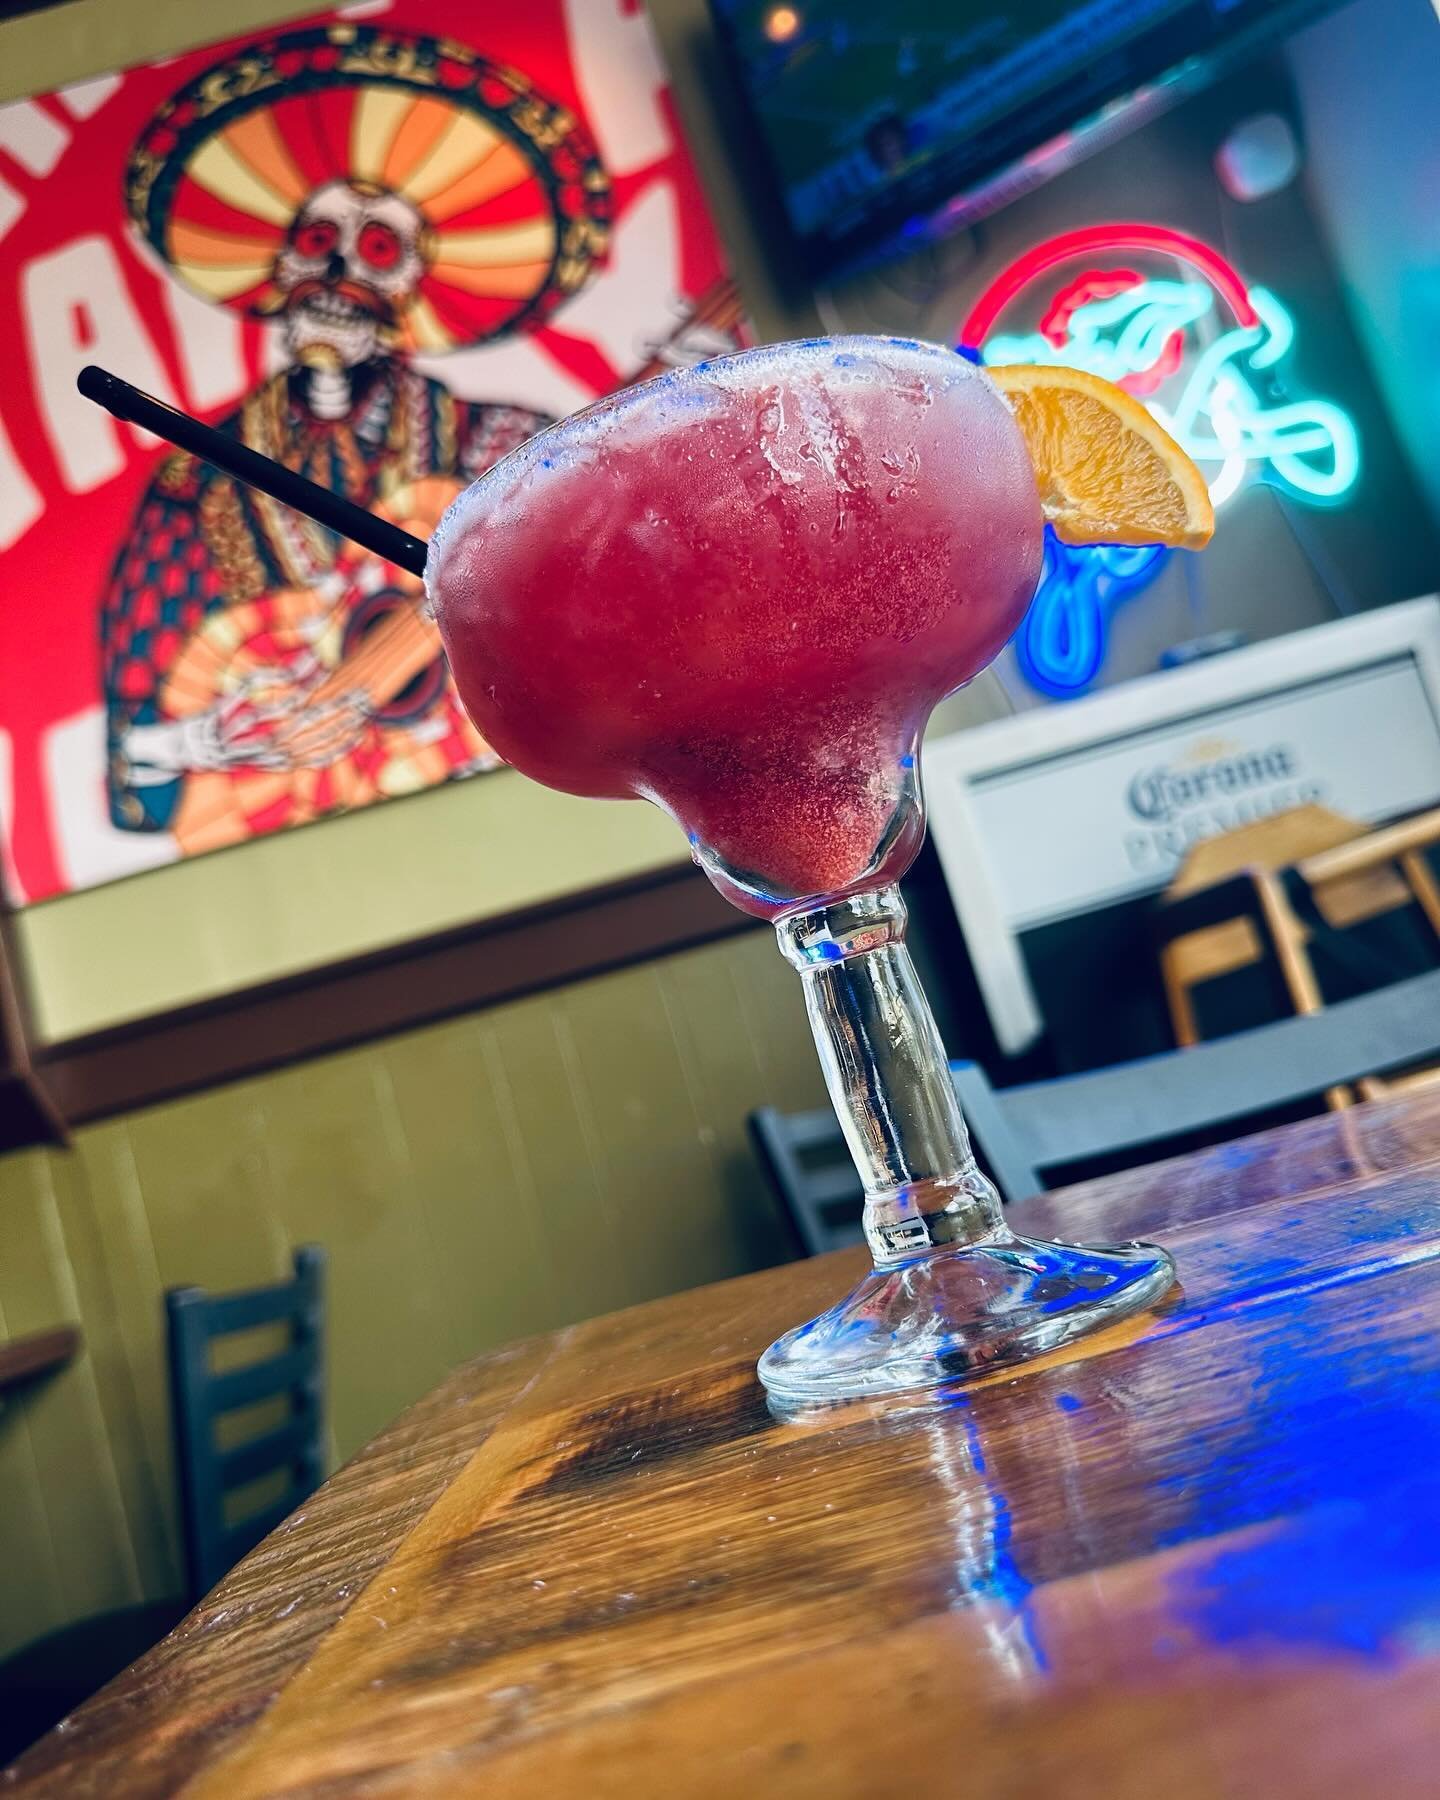 Guava pomegranate margarita is on special !